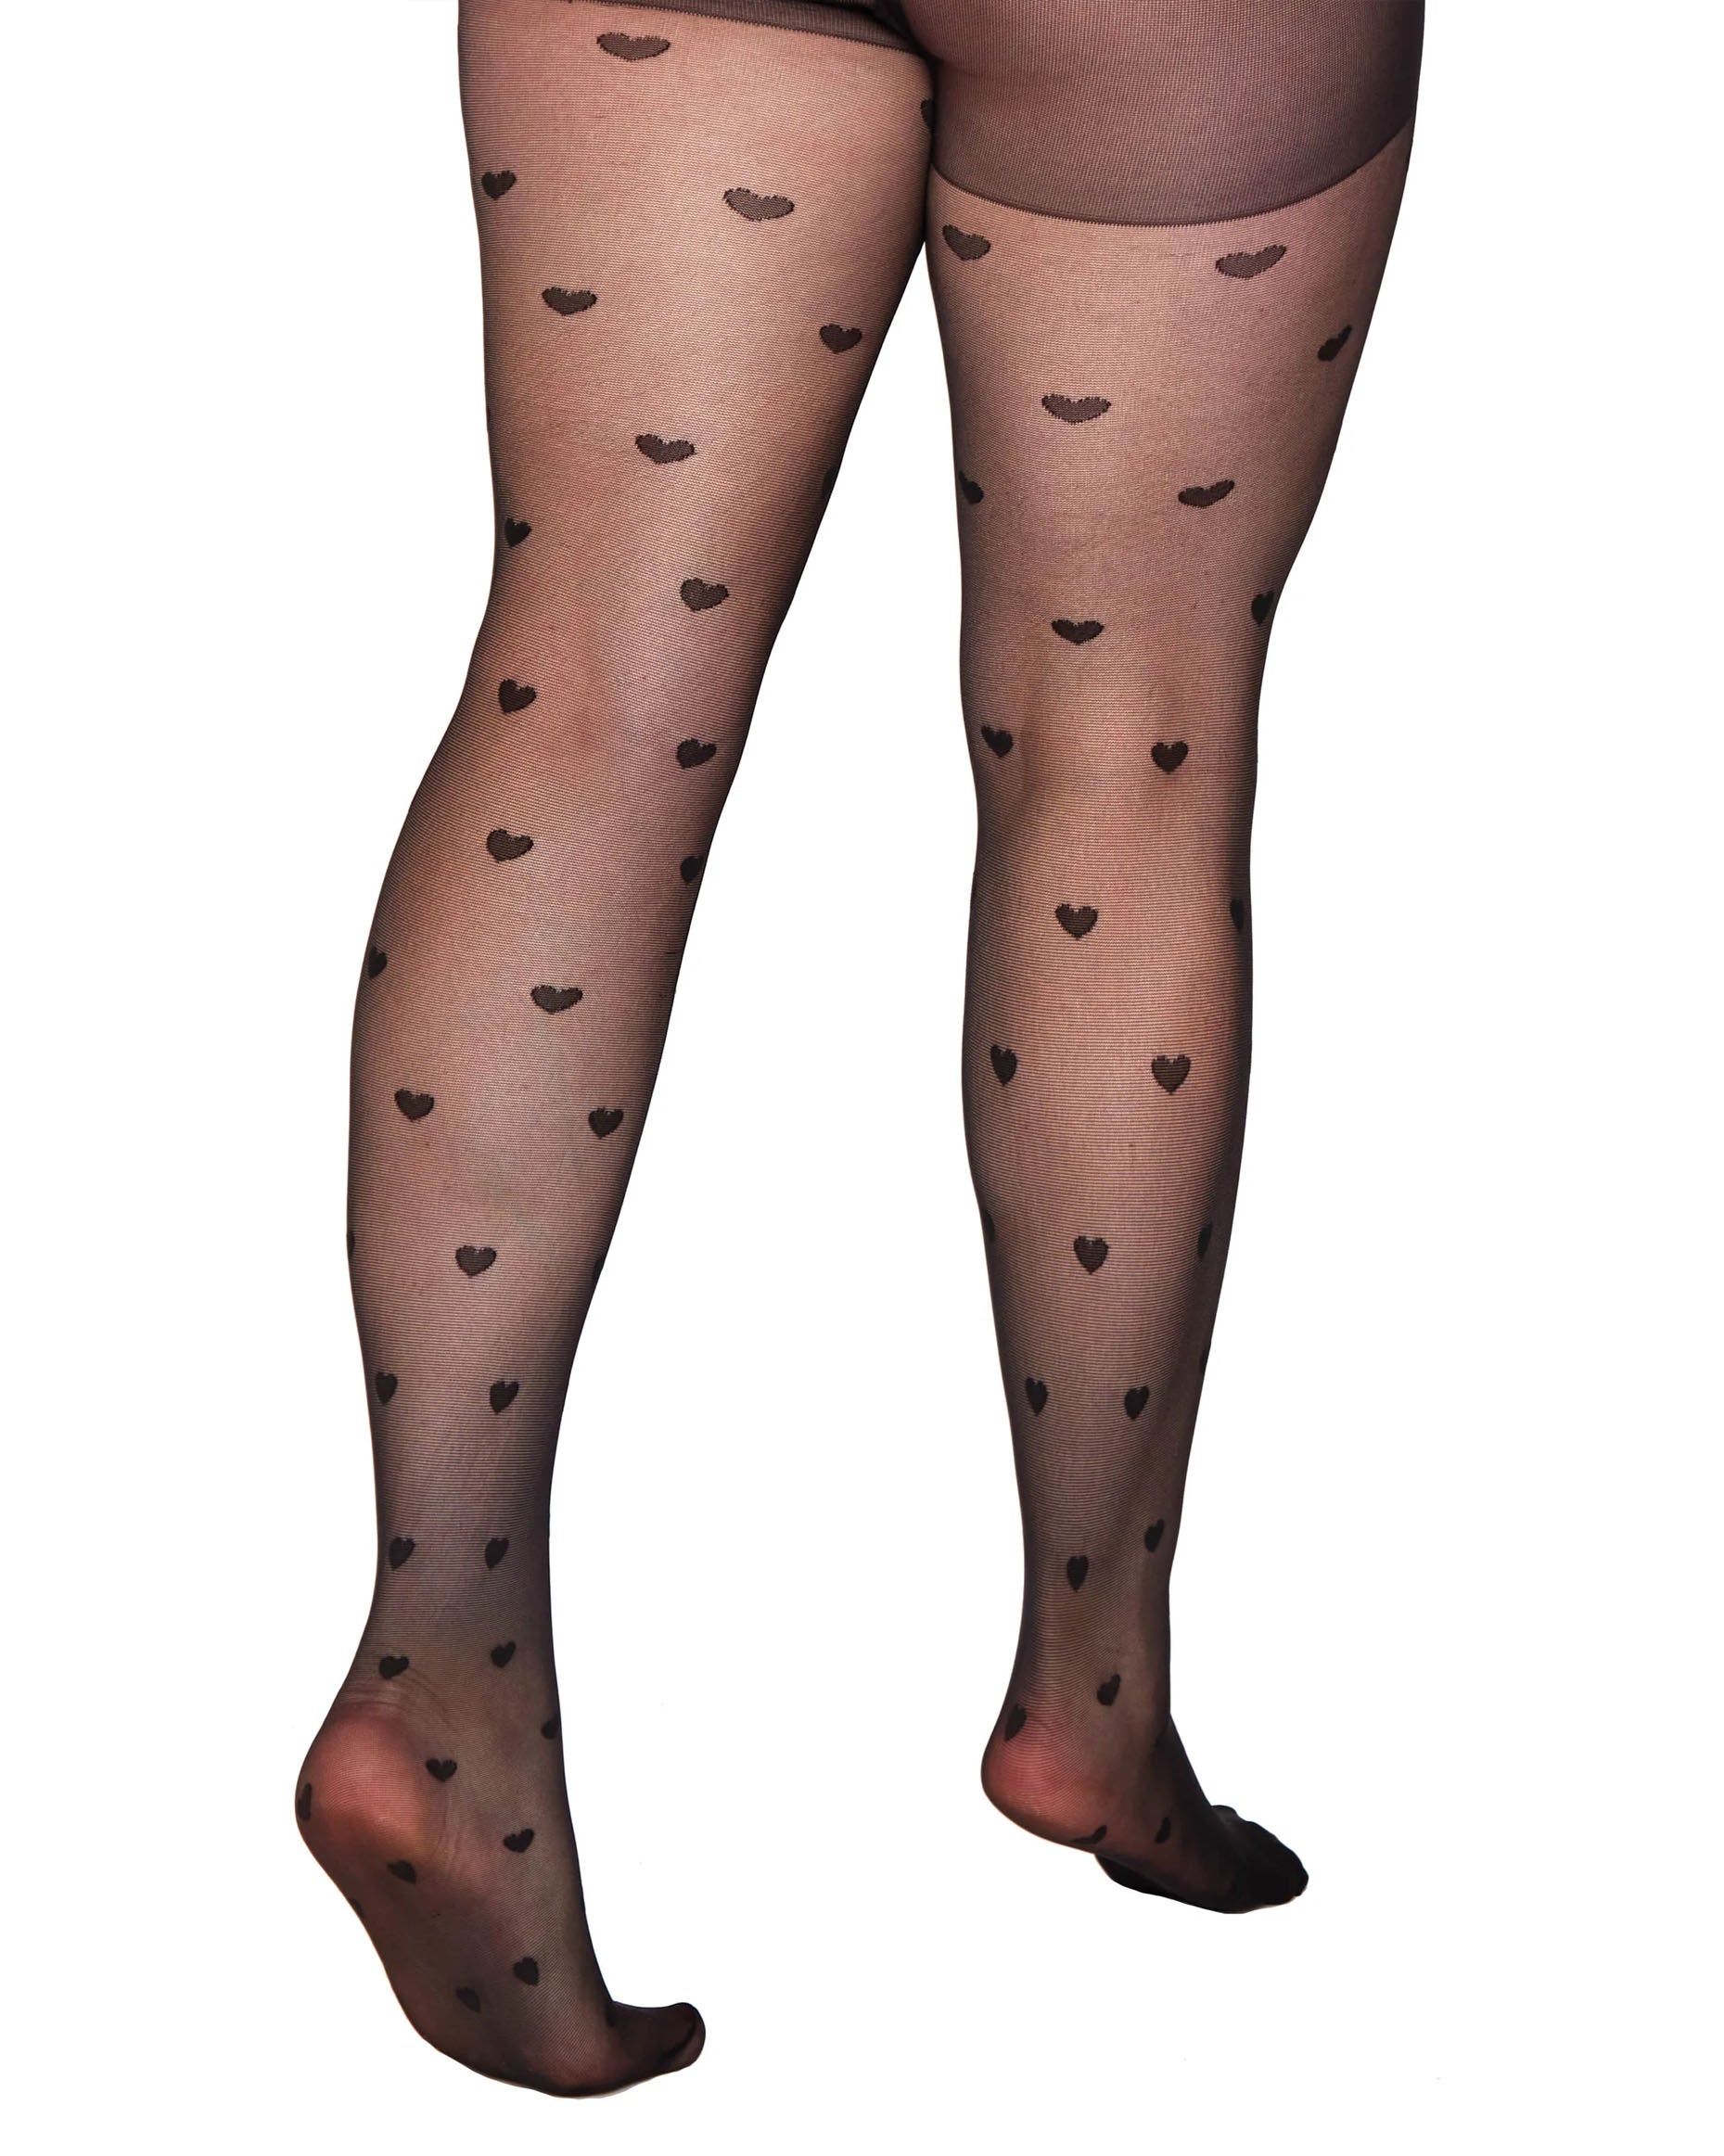 Pamela Mann Curvy Heart tights (Back View) - Sheer black plus size fashion tights with an all over woven heart pattern and semi-opaque boxer top.